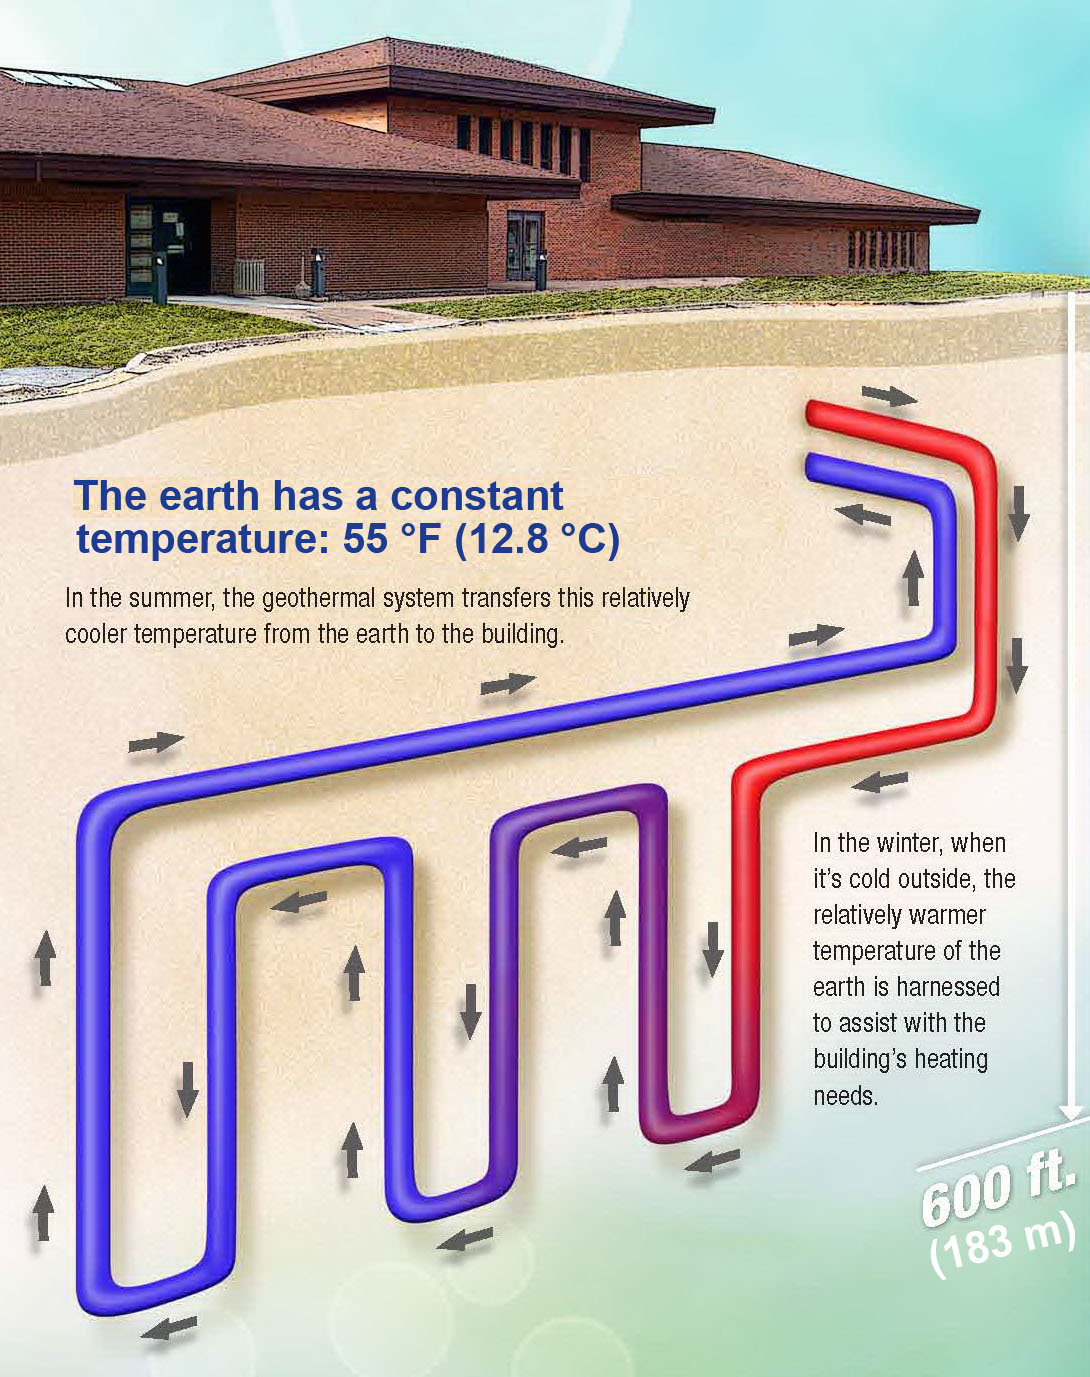 what-is-wind-energy-system-wind-as-a-power-source-geothermal-heating